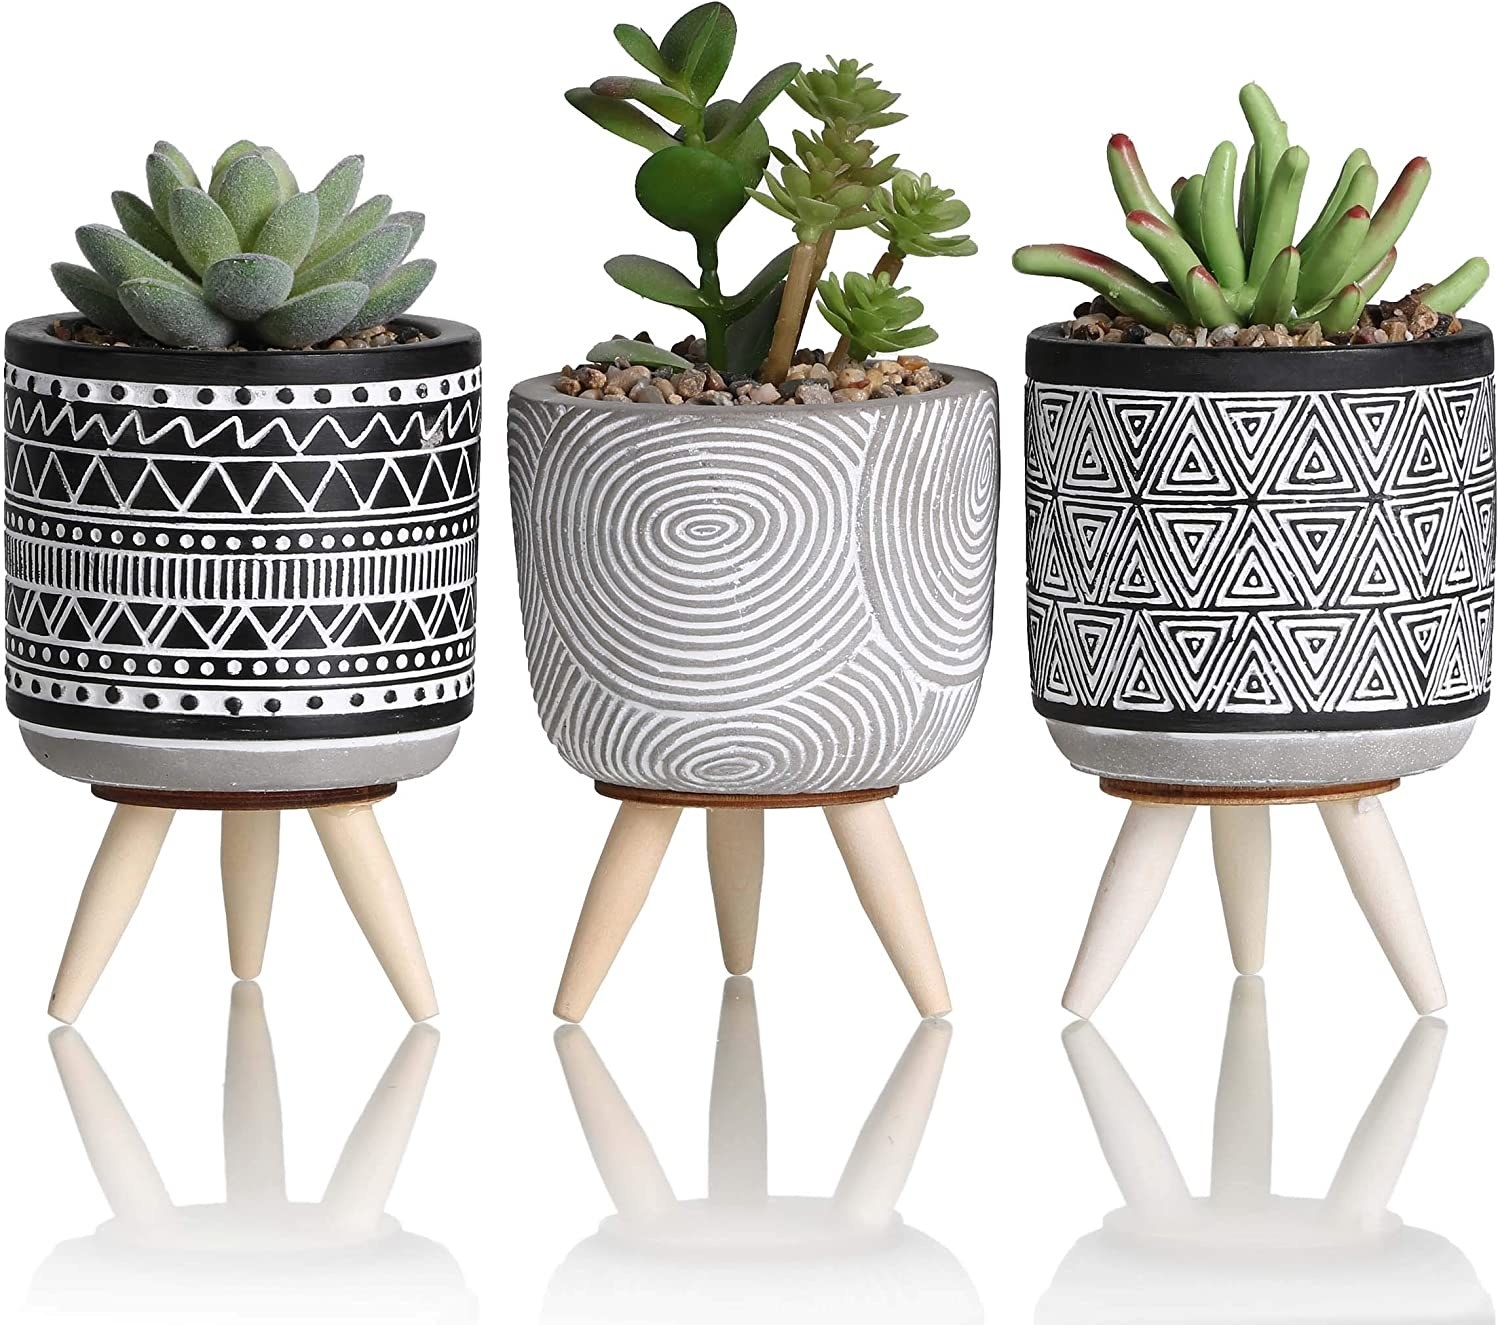 A set of three planters with patterned designs, each holding an artificial succulent plant